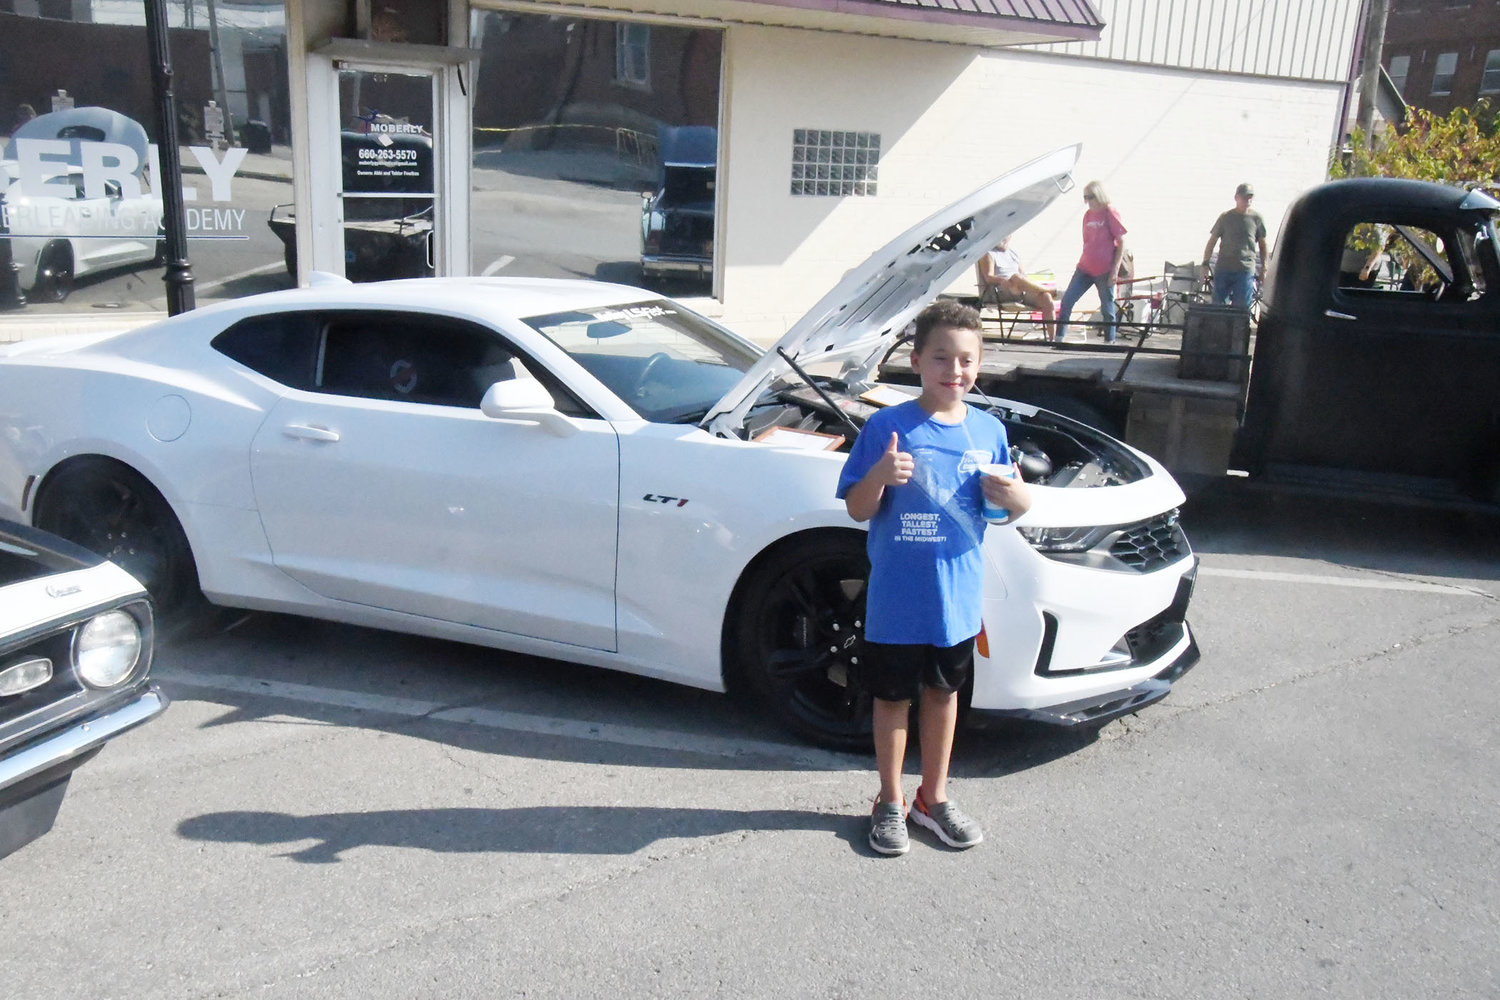 This young fan enjoyed the car show, especially looking at this 2022 Chevrolet Camaro LTI owned by Greg Carlos.